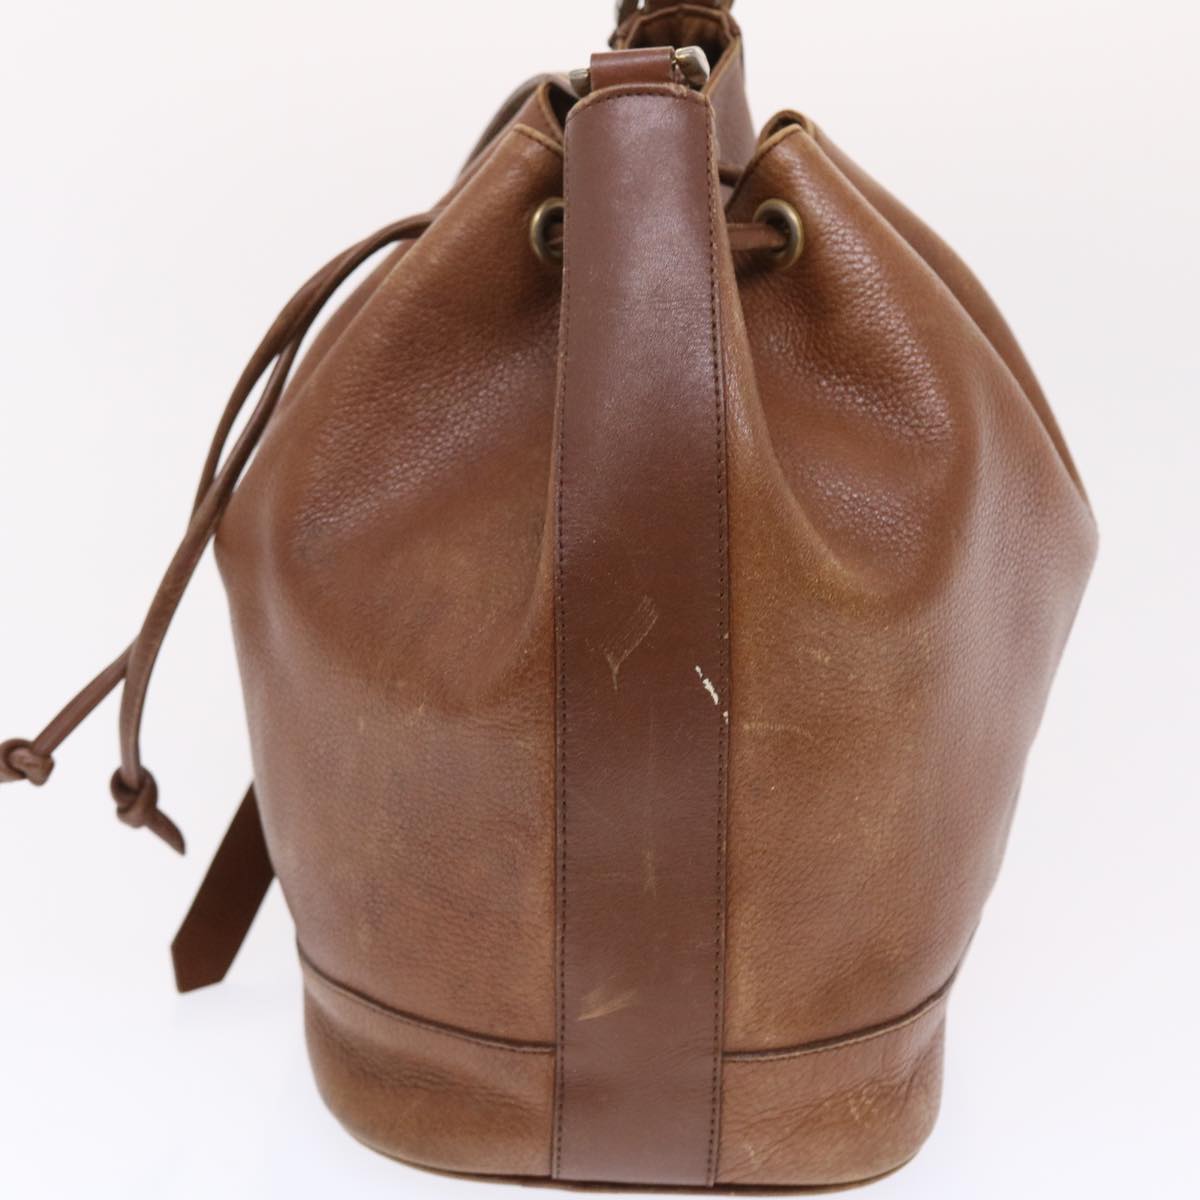 Burberrys Shoulder Bag Leather Brown Auth yk8108B